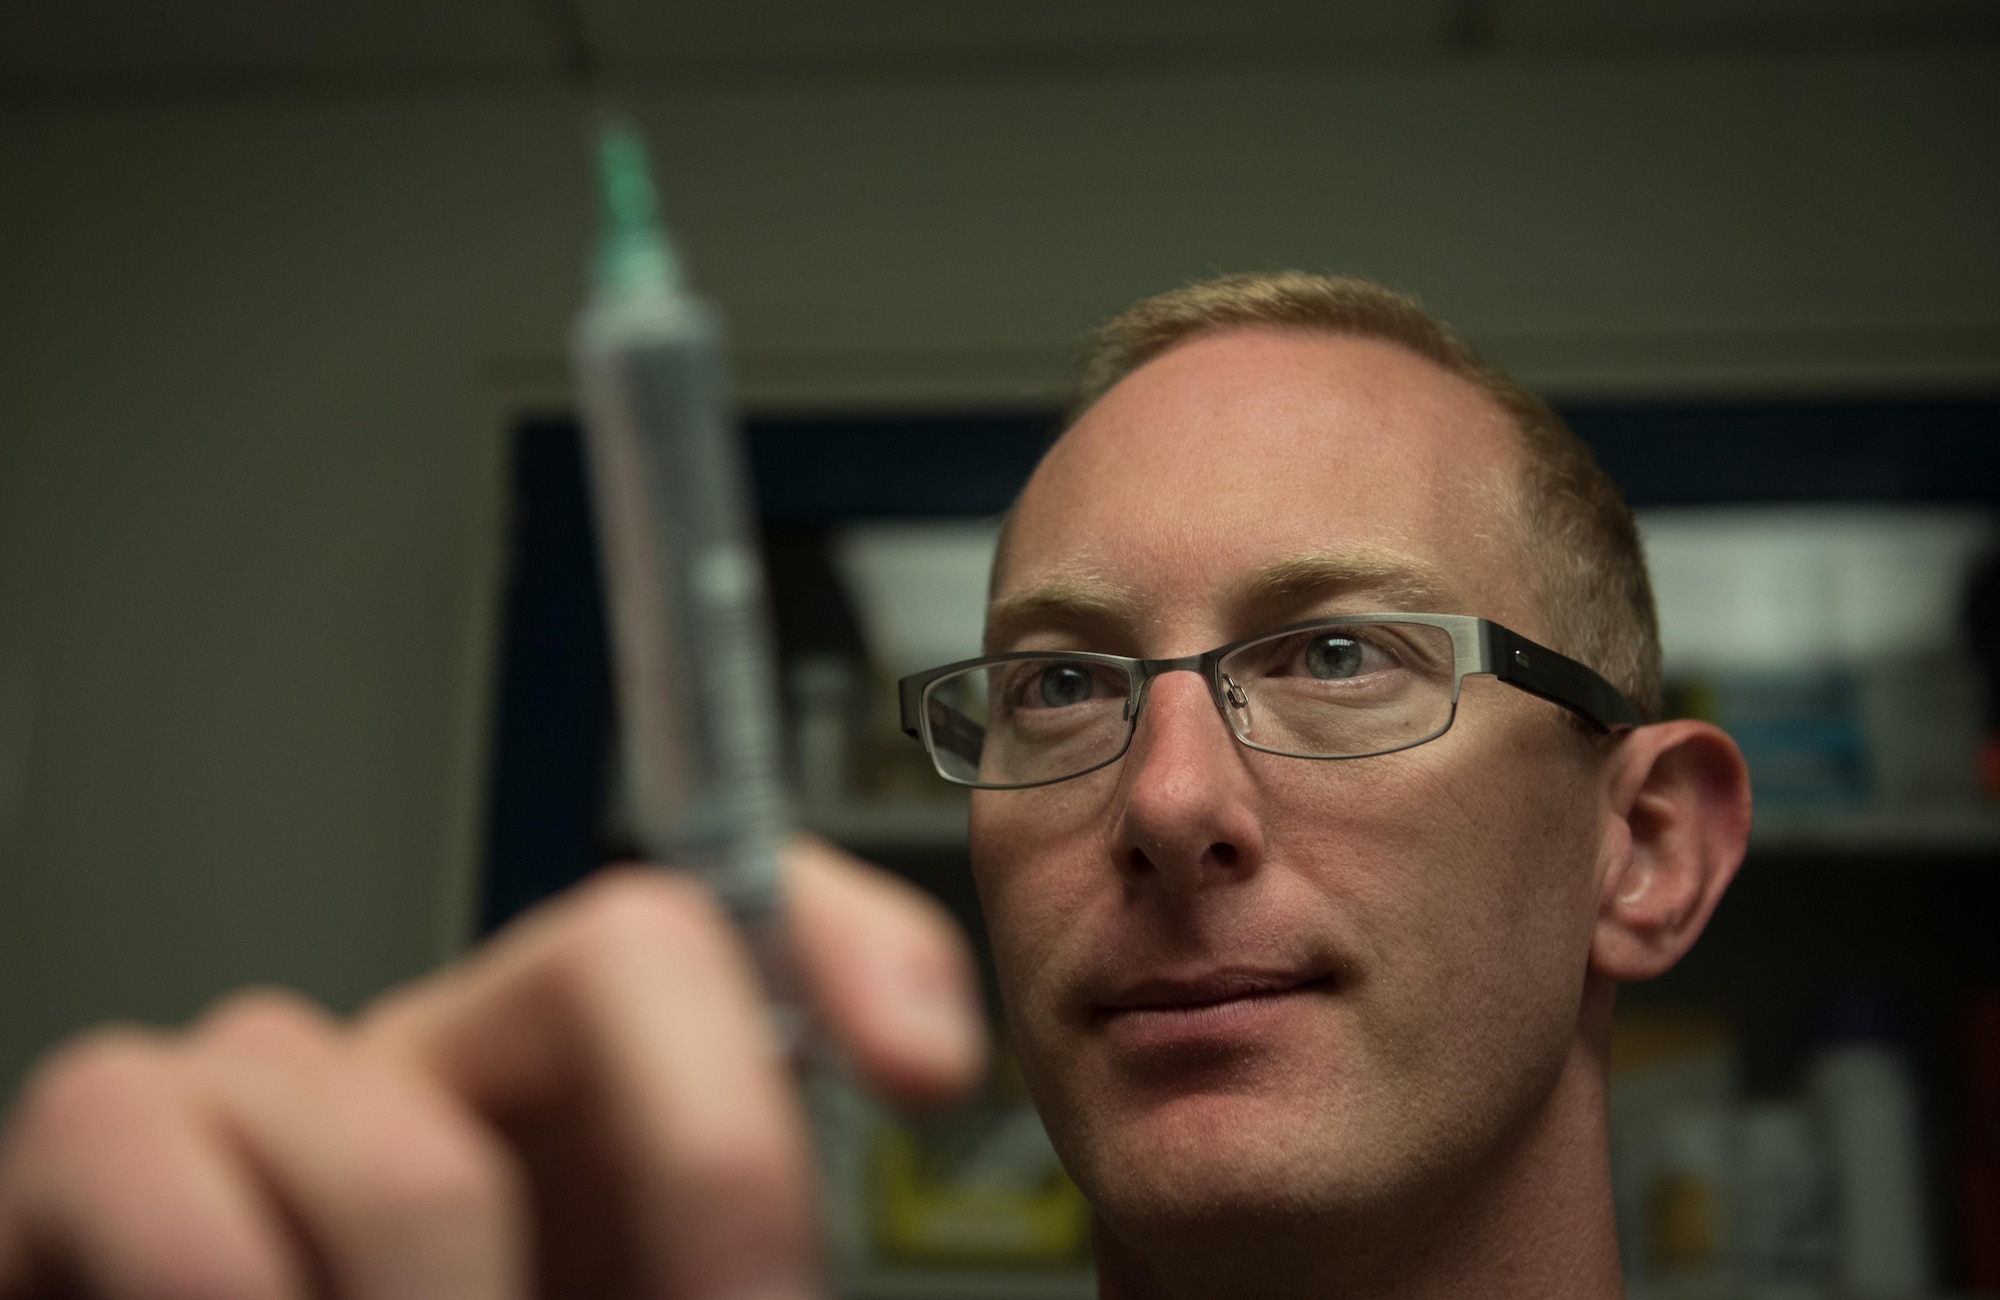 U.S. Air Force Capt. James Dunham, an intensive care ward nurse at Craig Joint Theater Hospital, prepares a syringe at Bagram Airfield, Afghanistan, May 3, 2017. As a nurse, Dunham is the link between the patient and doctor. They are responsible for ensuring medicine is administered, pain is managed and attending to the patient in any way they can. (U.S. Air Force photo by Staff Sgt. Benjamin Gonsier)